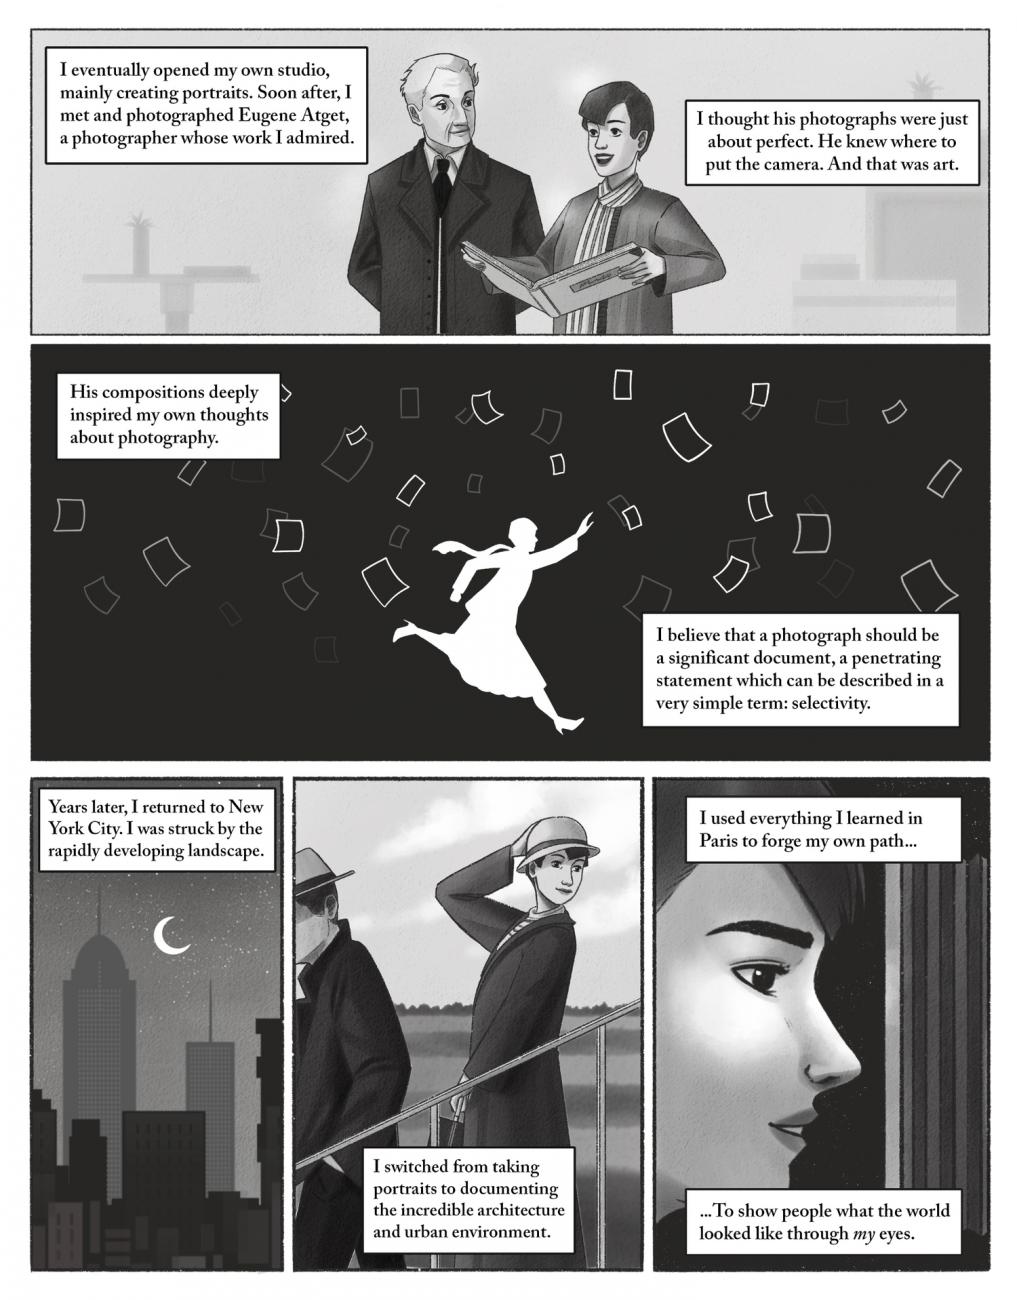 Picturing a City: A Comic About Berenice Abbott, page two